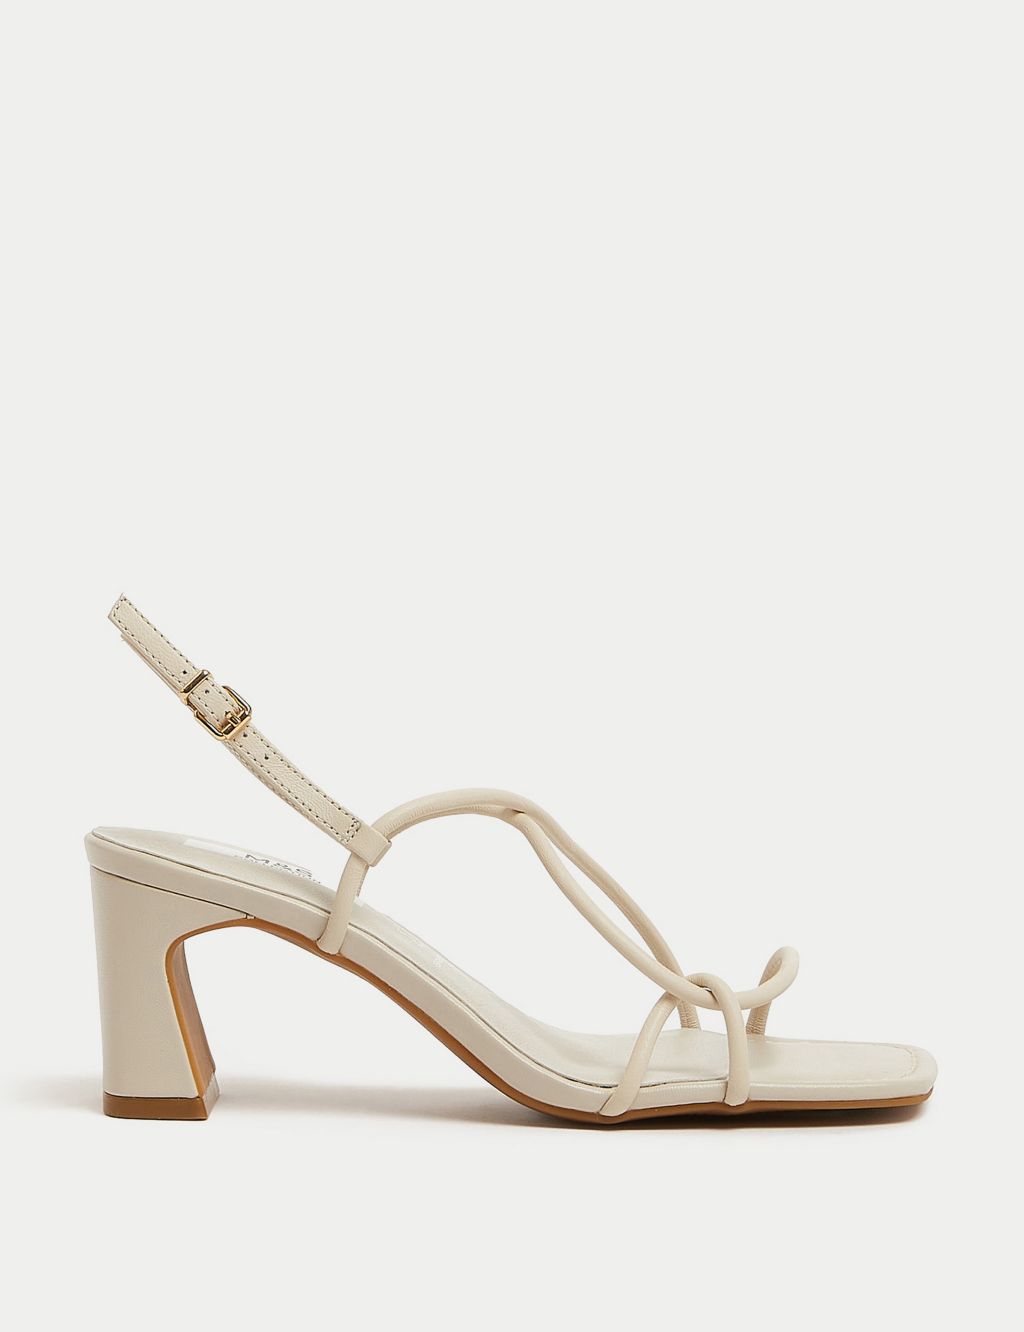 Leather Strappy Statement Sandals image 1